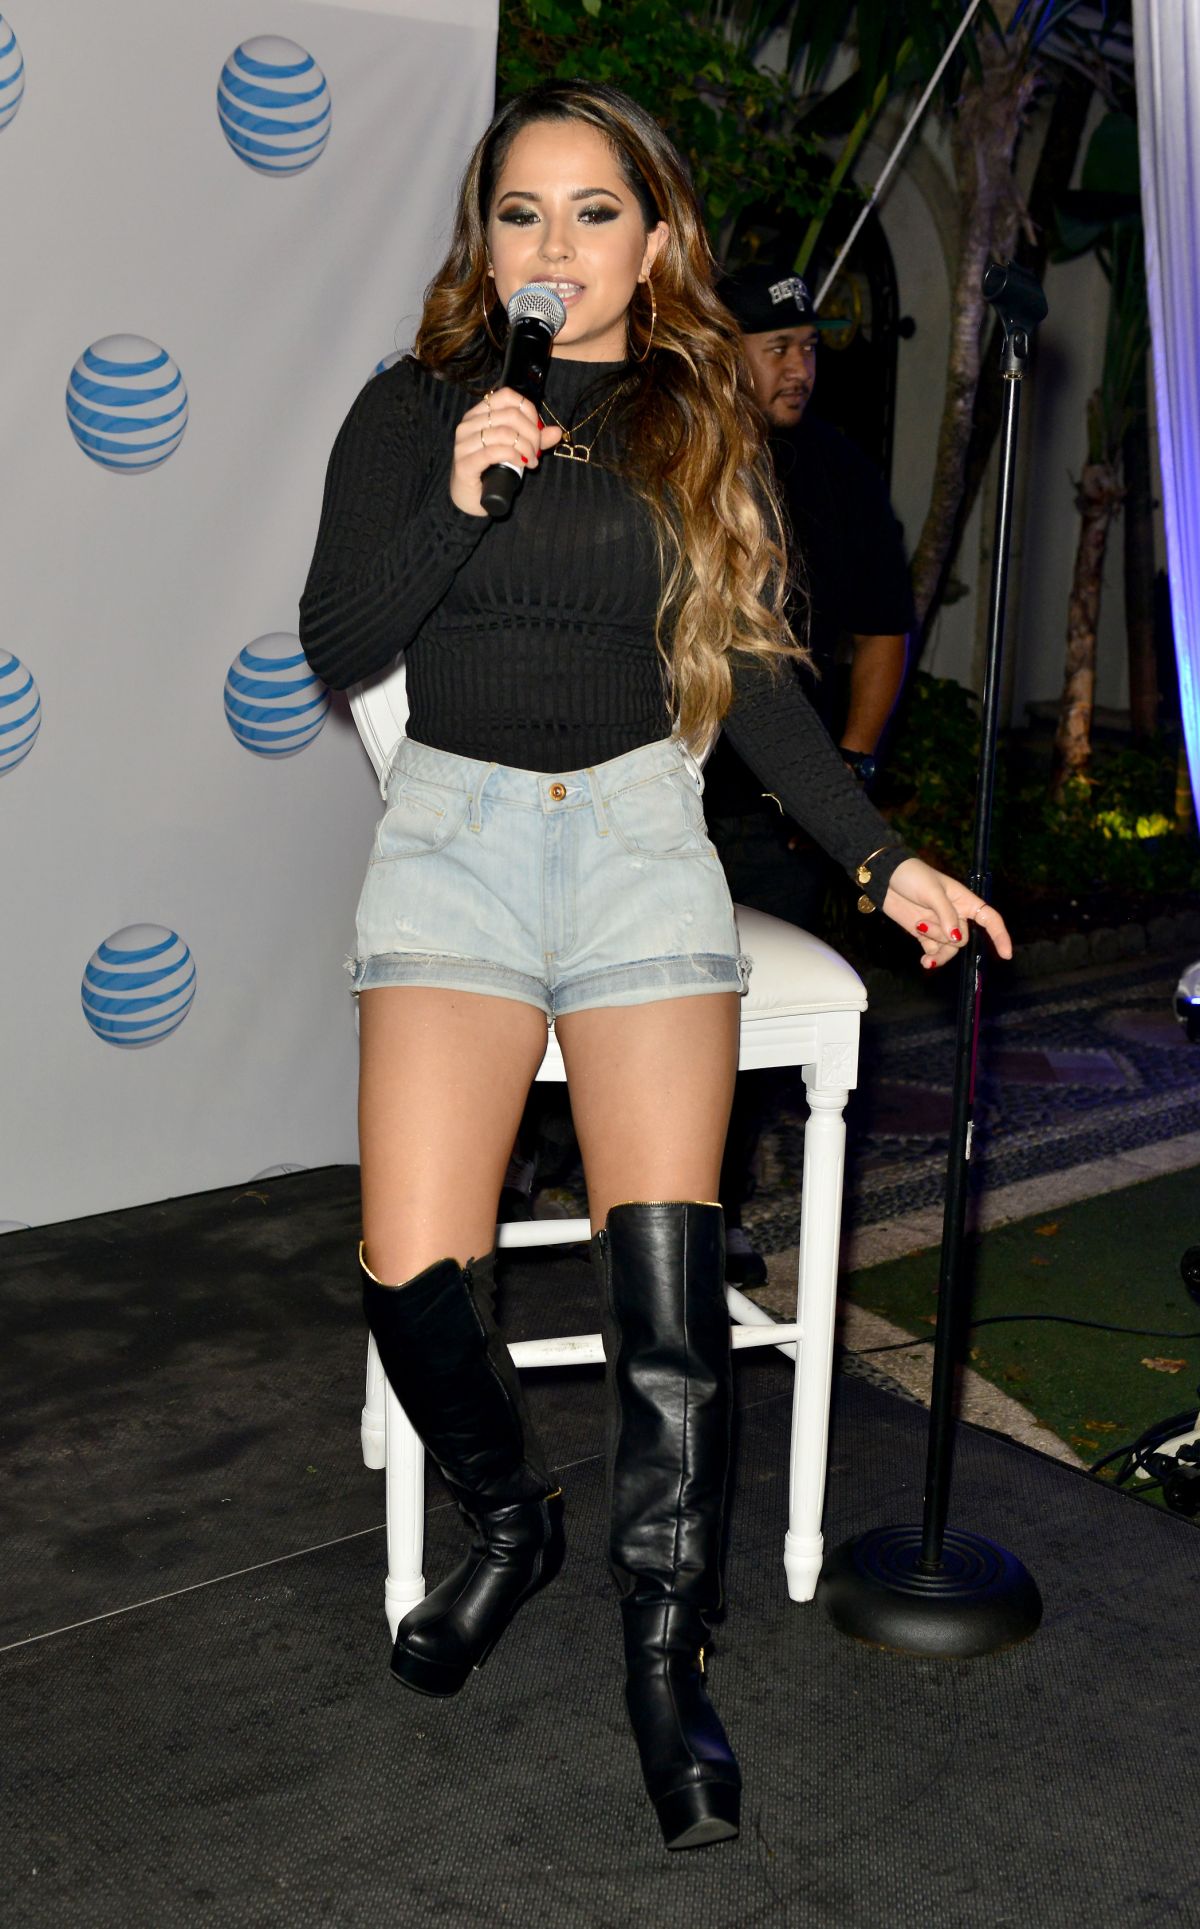 BECKY G at AT&T Latino’s Night with Becky G in Miami 12/18/2015